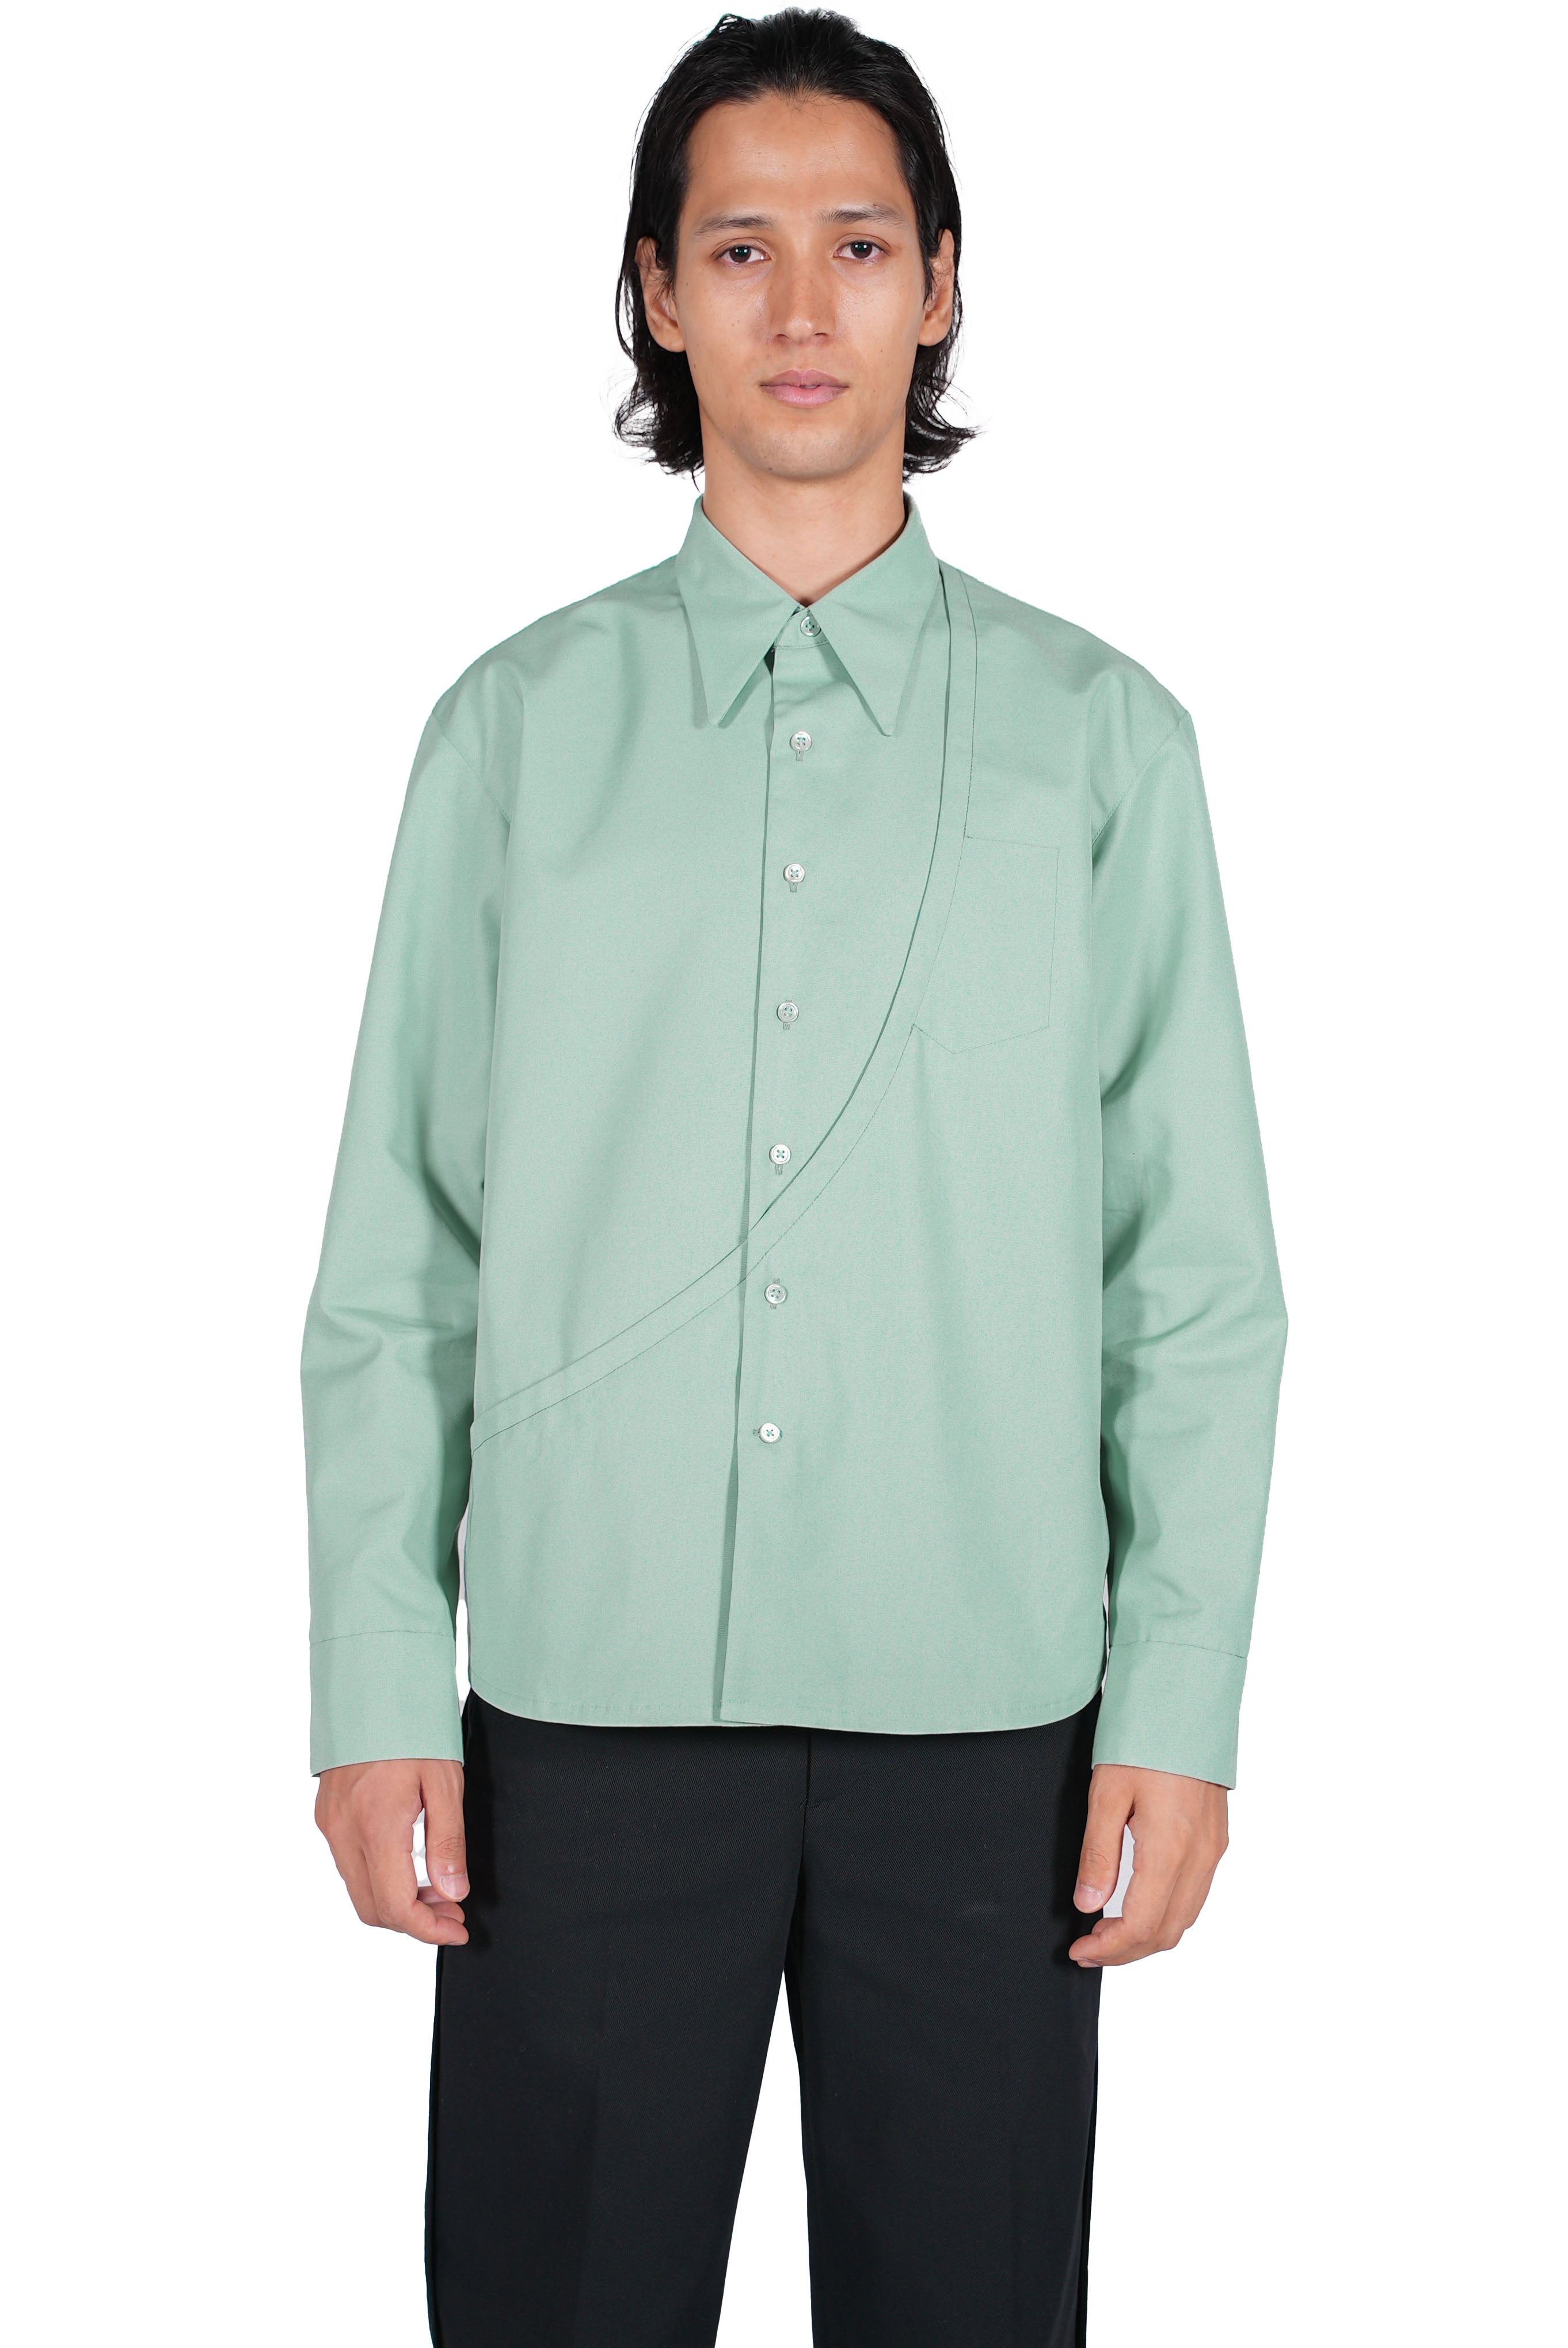 Coloours strong 002 green shirt jacket グリーン